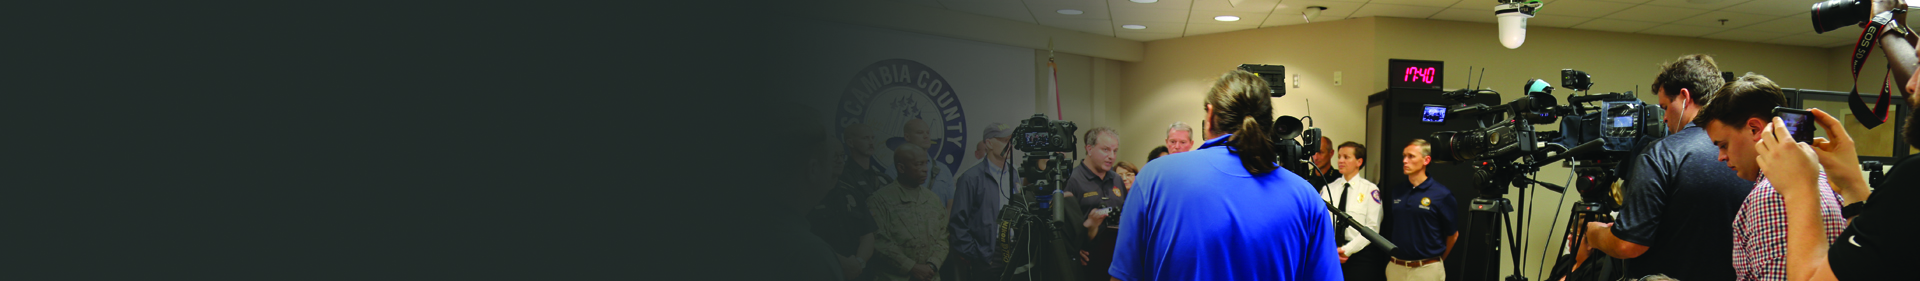 Media outlets hold cameras at a press conference during Hurricane Michael